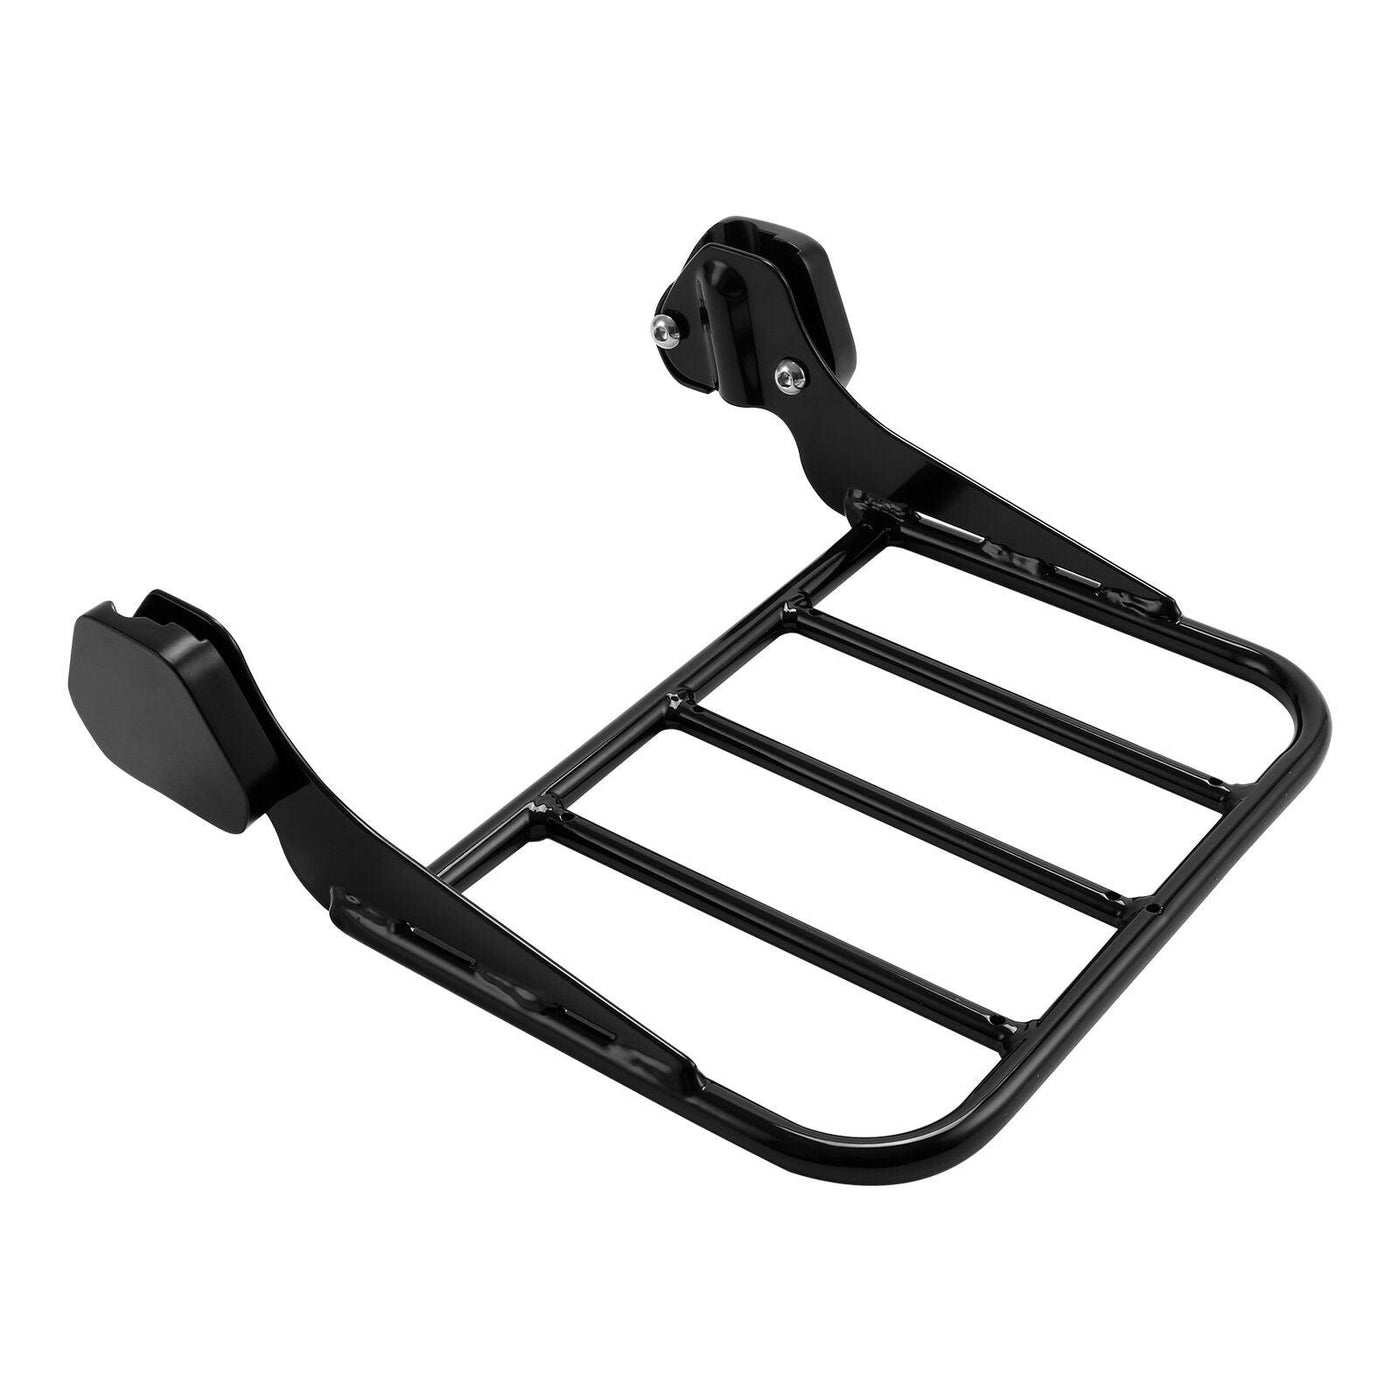 Luggage Rack Fit For Harley Touring Electra Street Road Glide 97-08 06 07 Black - Moto Life Products